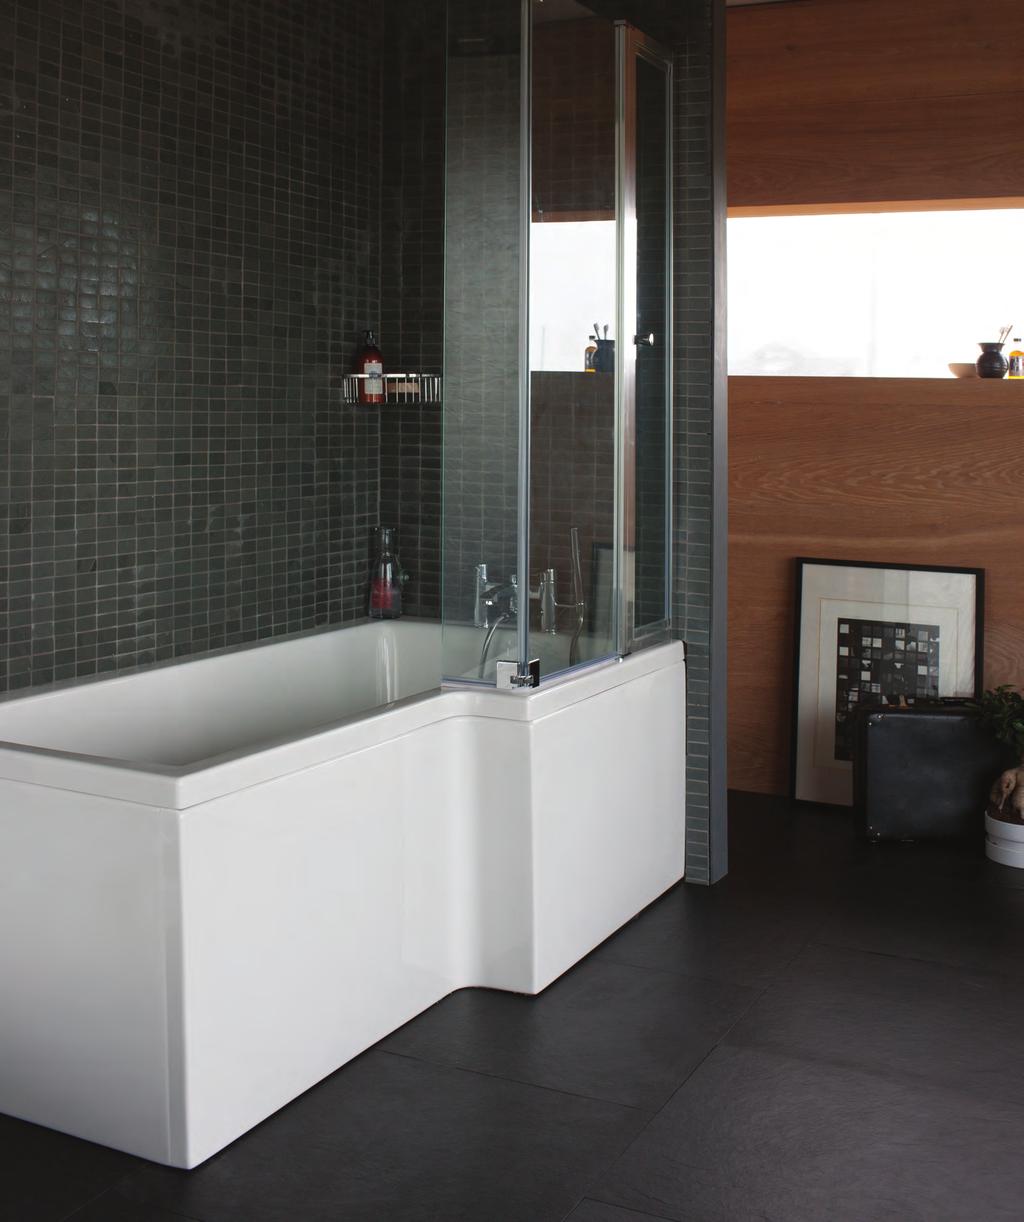 ECOSQUARE A geometric and angular showering bath to pair with other square or Cube shaped products from the Britton range.